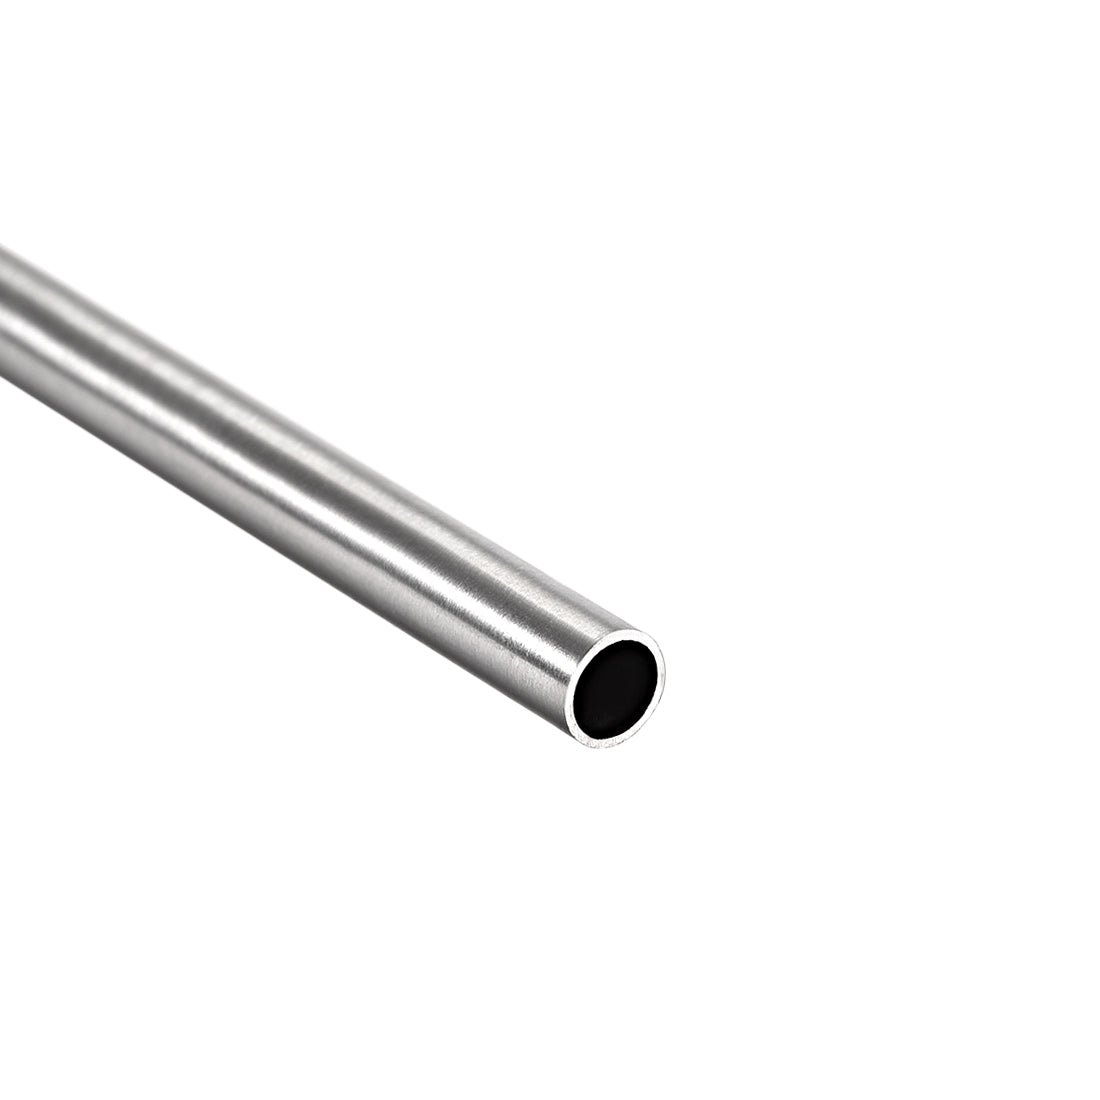 uxcell Uxcell 304 Stainless Steel Round Tubing 5mm OD 0.4mm Wall Thickness 250mm Length Seamless Straight Pipe Tube 2 Pcs